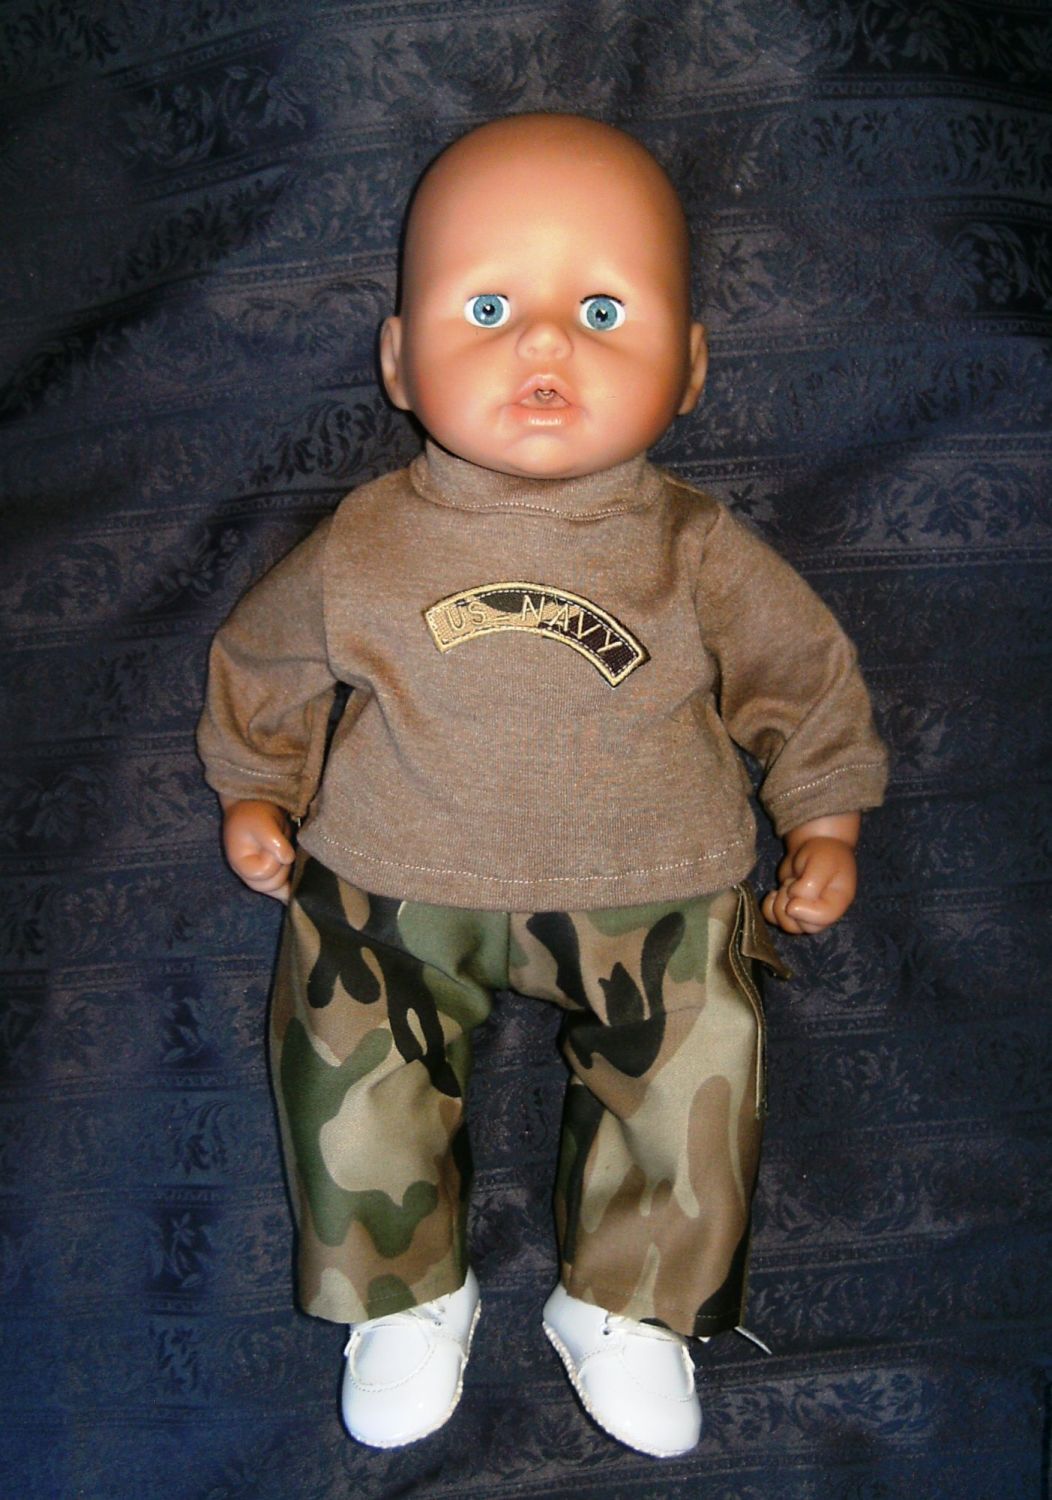 Doll's sweatshirt and cargo pants to fit the 18 inch high George doll